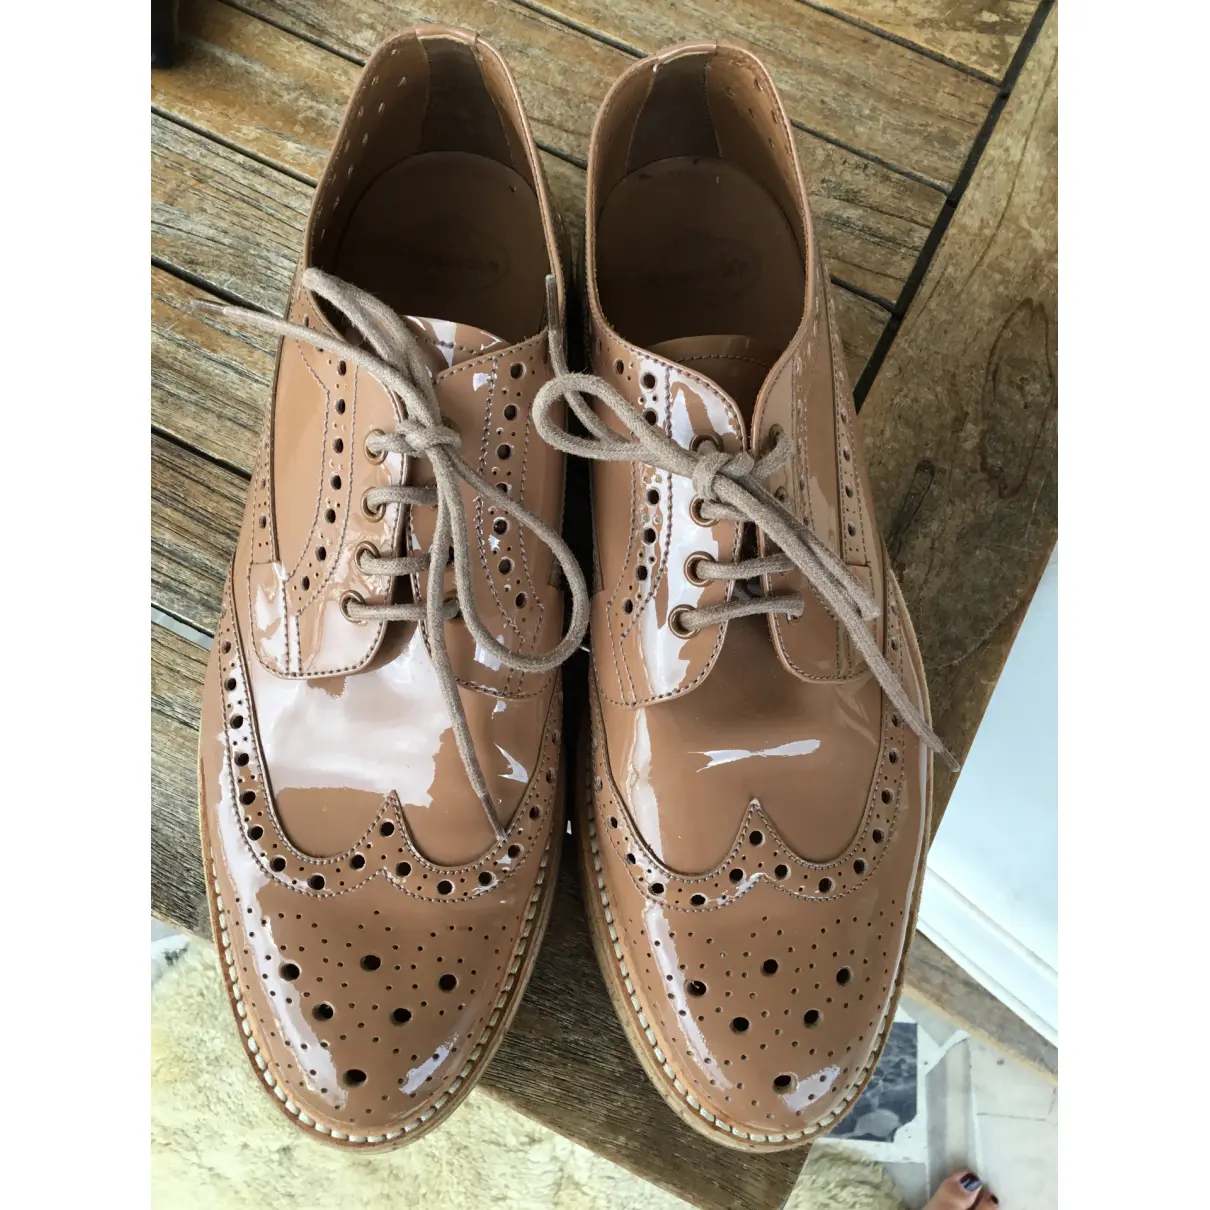 Buy Church's Patent leather lace ups online